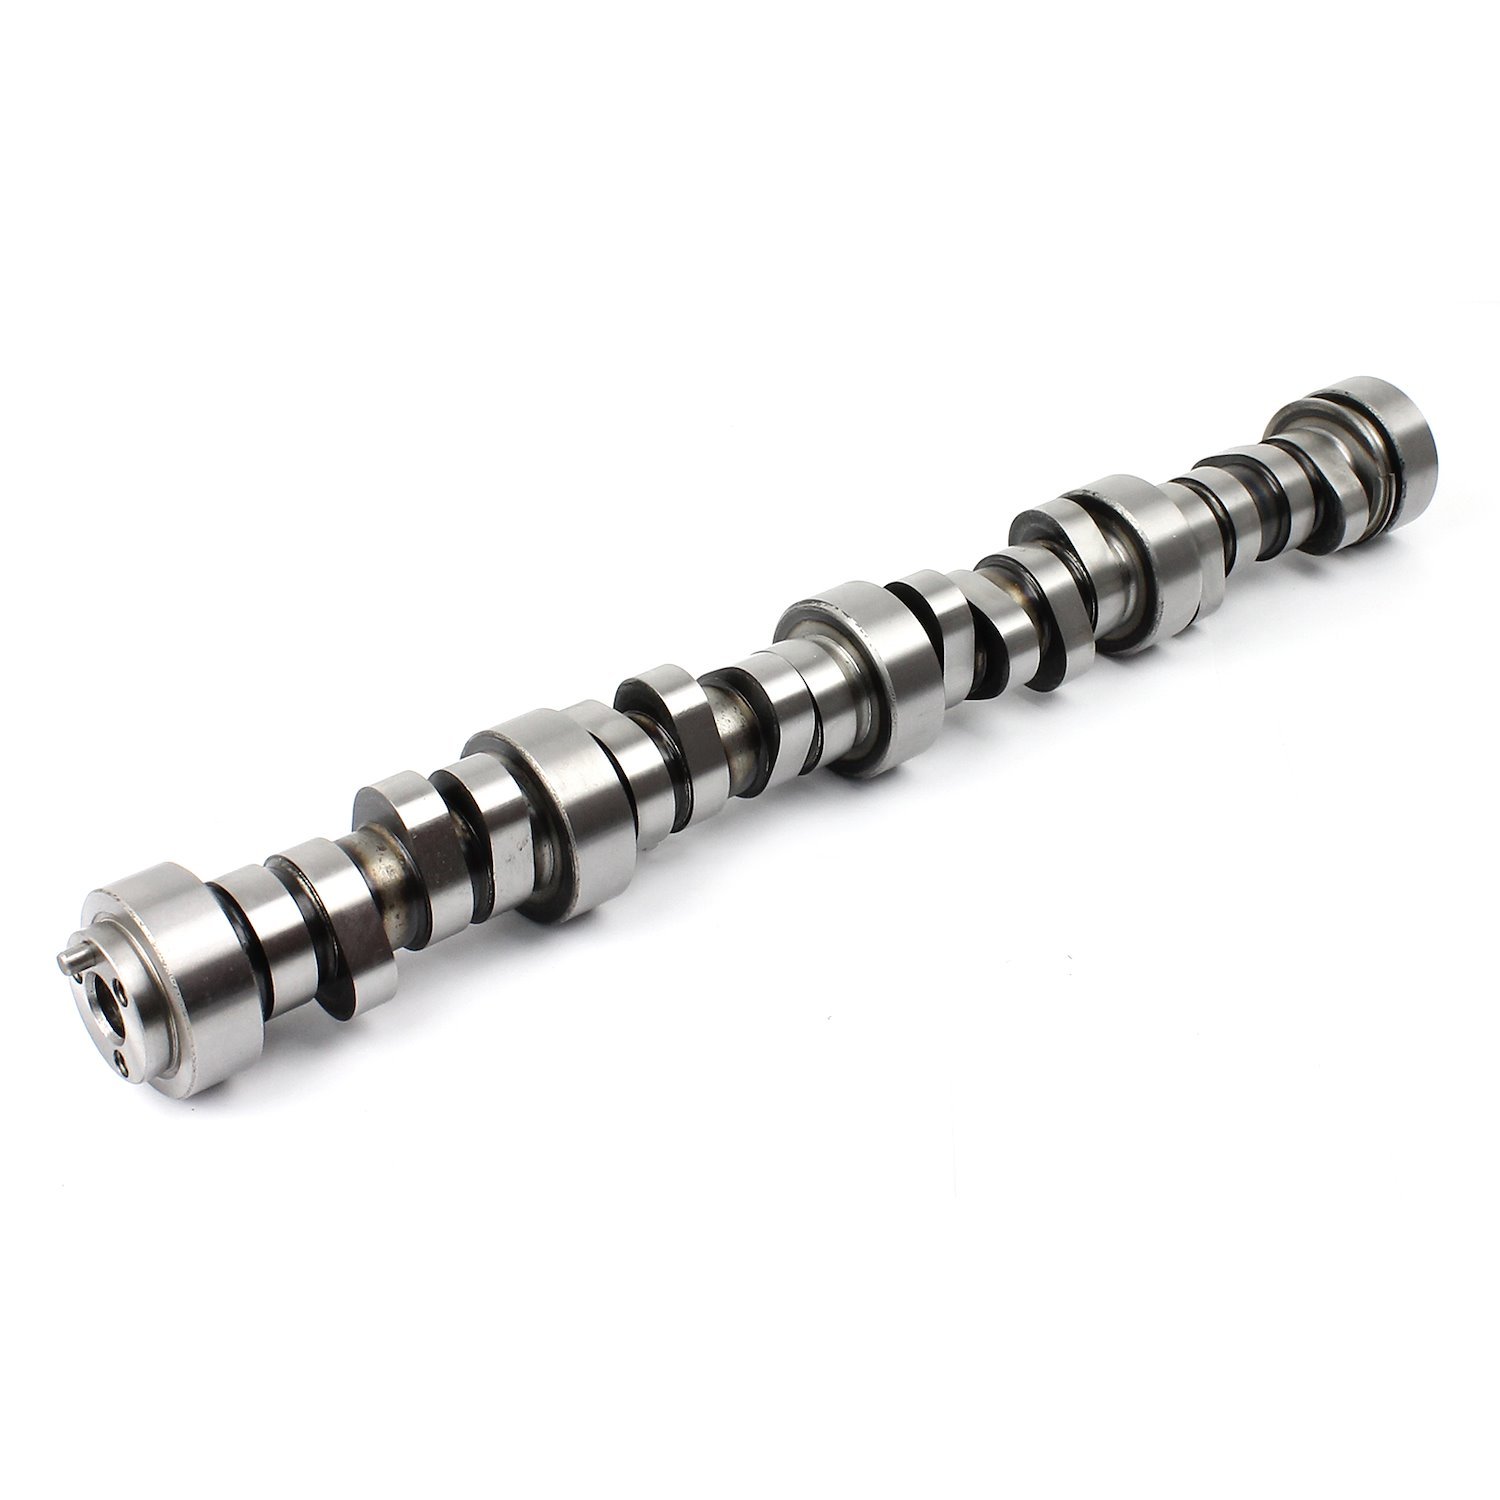 Chevy LS1 LS2 LS6 Hydraulic Roller Tappet Camshaft .561/.578 Lift